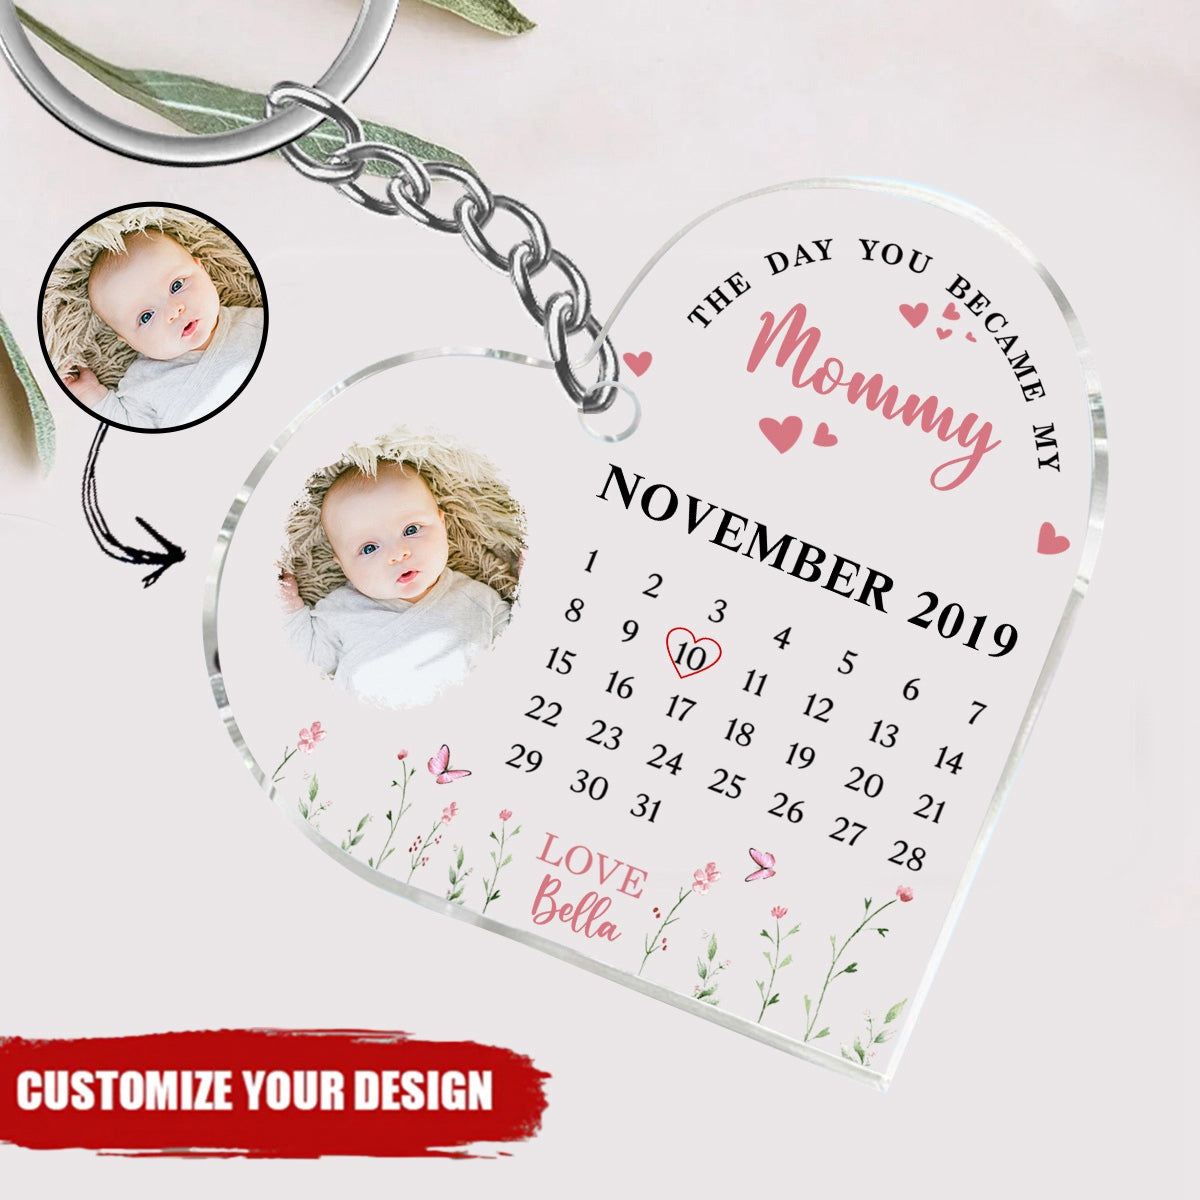 The Day You Became My Mommy Heart-shaped Personalized Acrylic Keychain